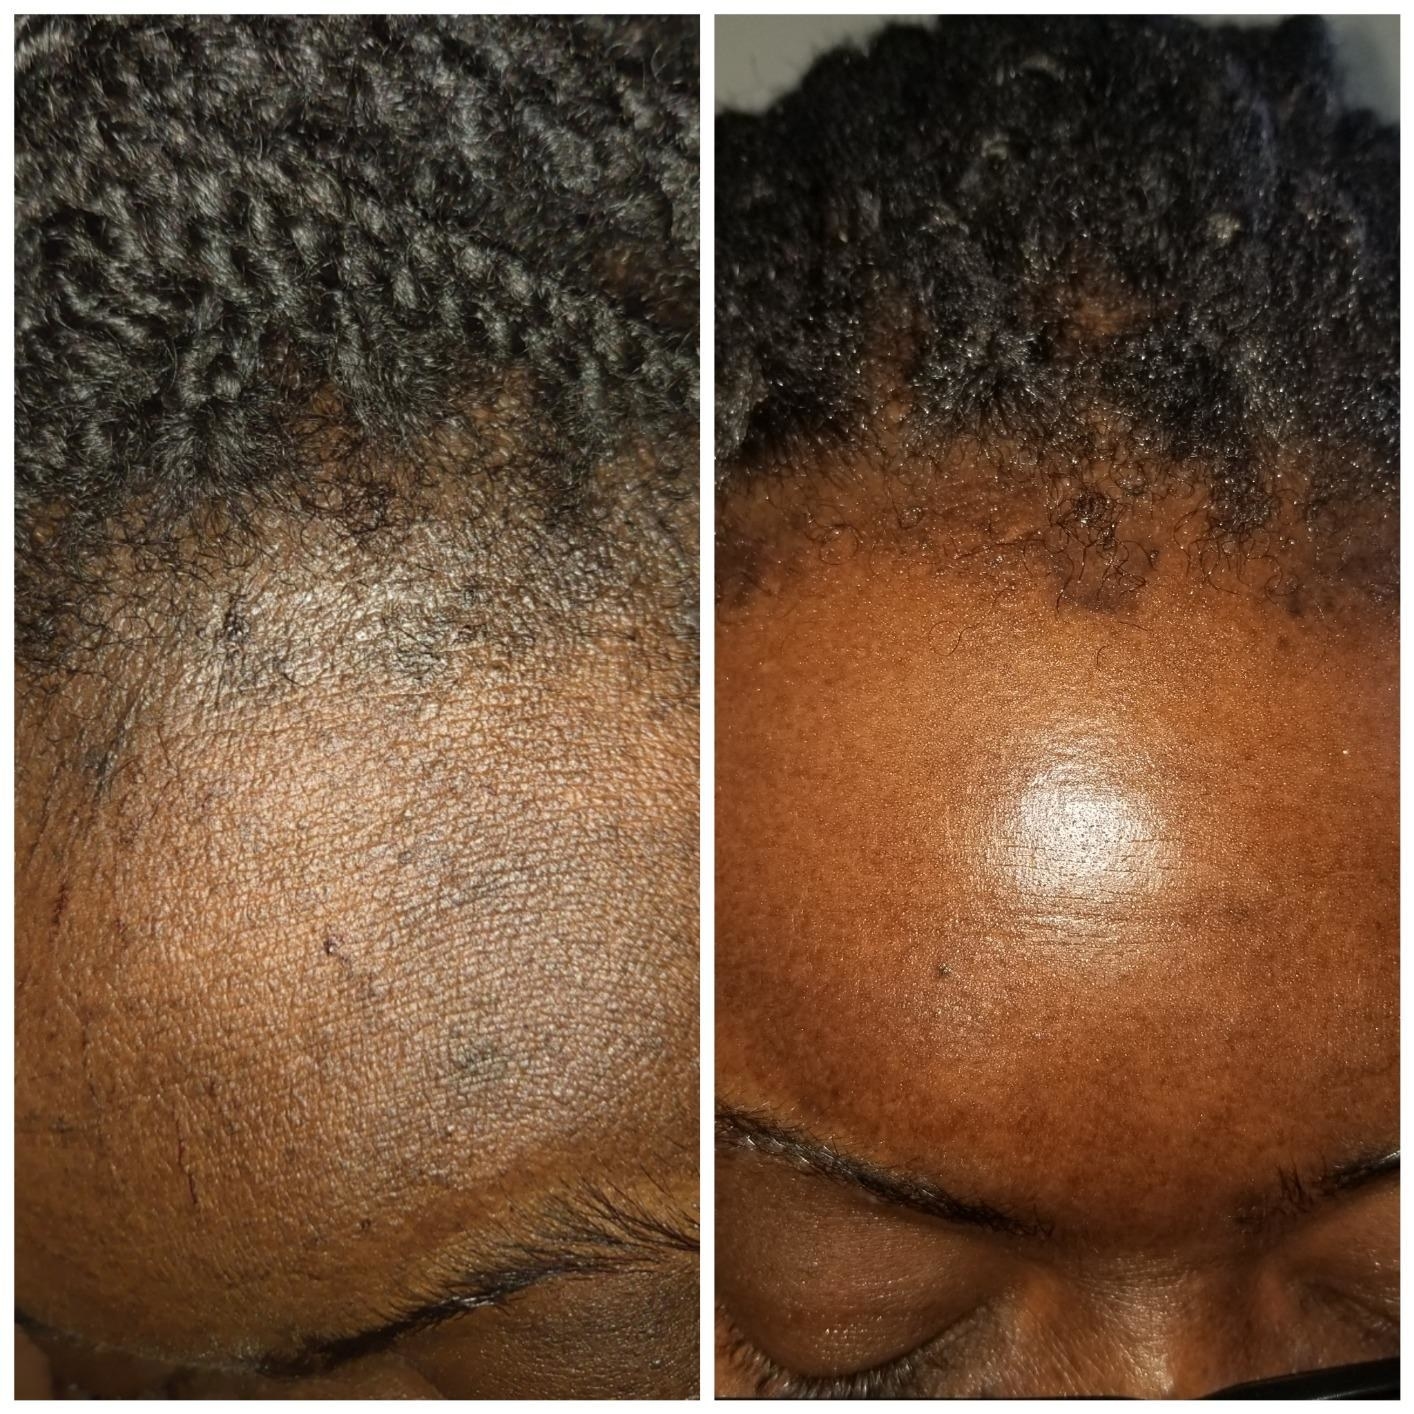 A reviewer&#x27;s skin before and after use, with more glowing skin with less scaliness and dryness after use